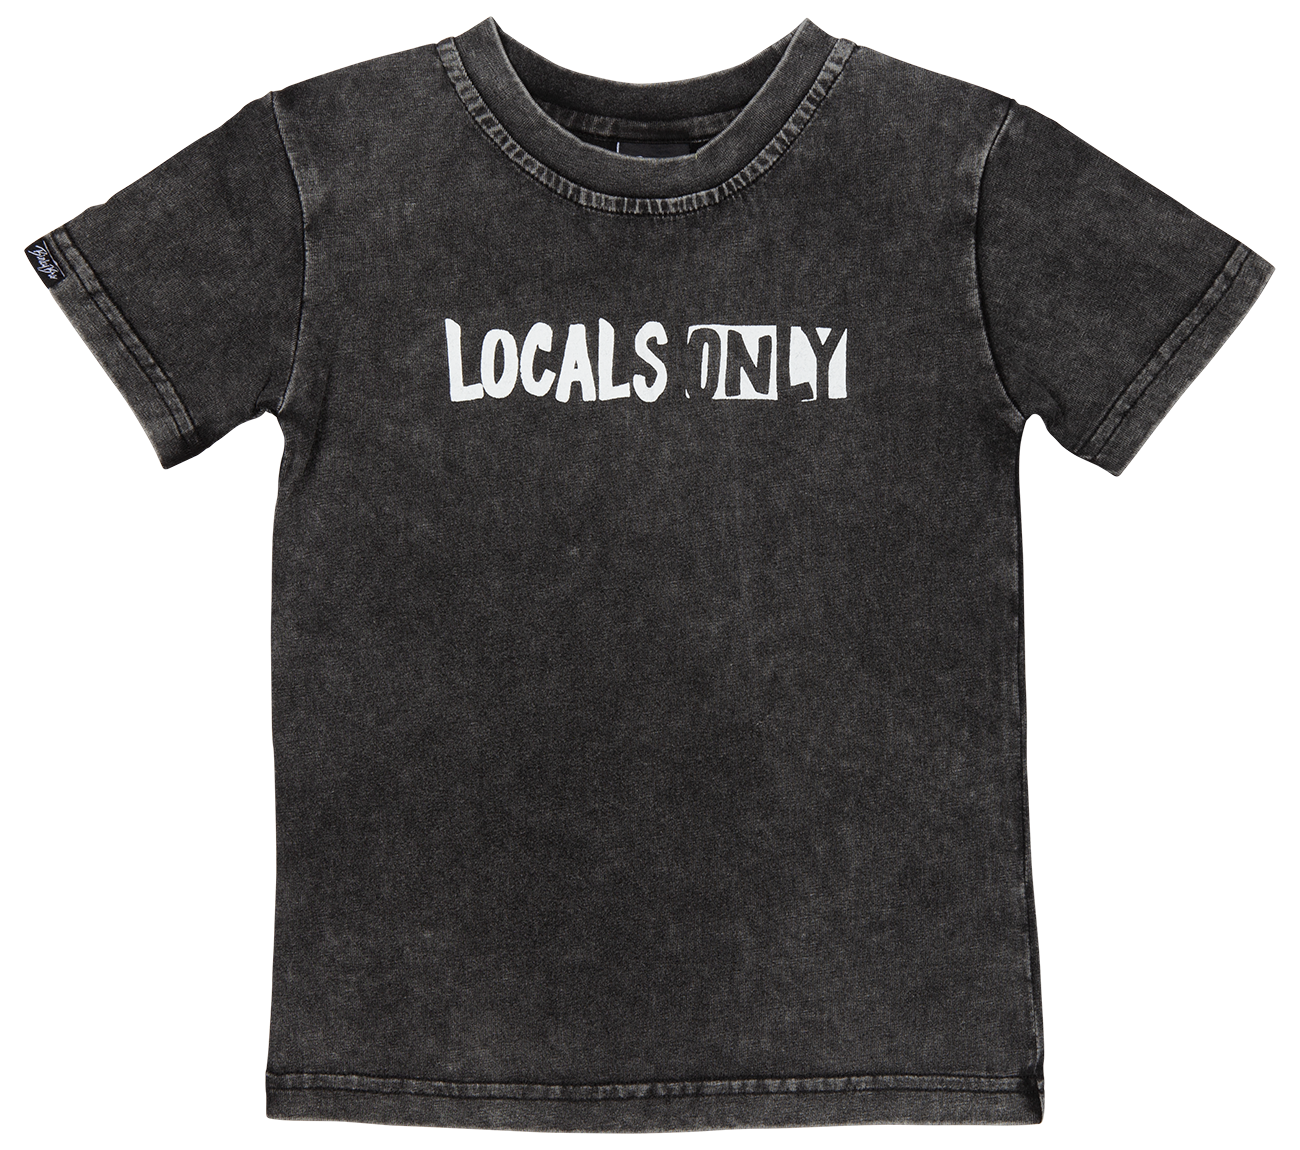 Locals Only T-Shirt Tea for Three: A Children's Boutique